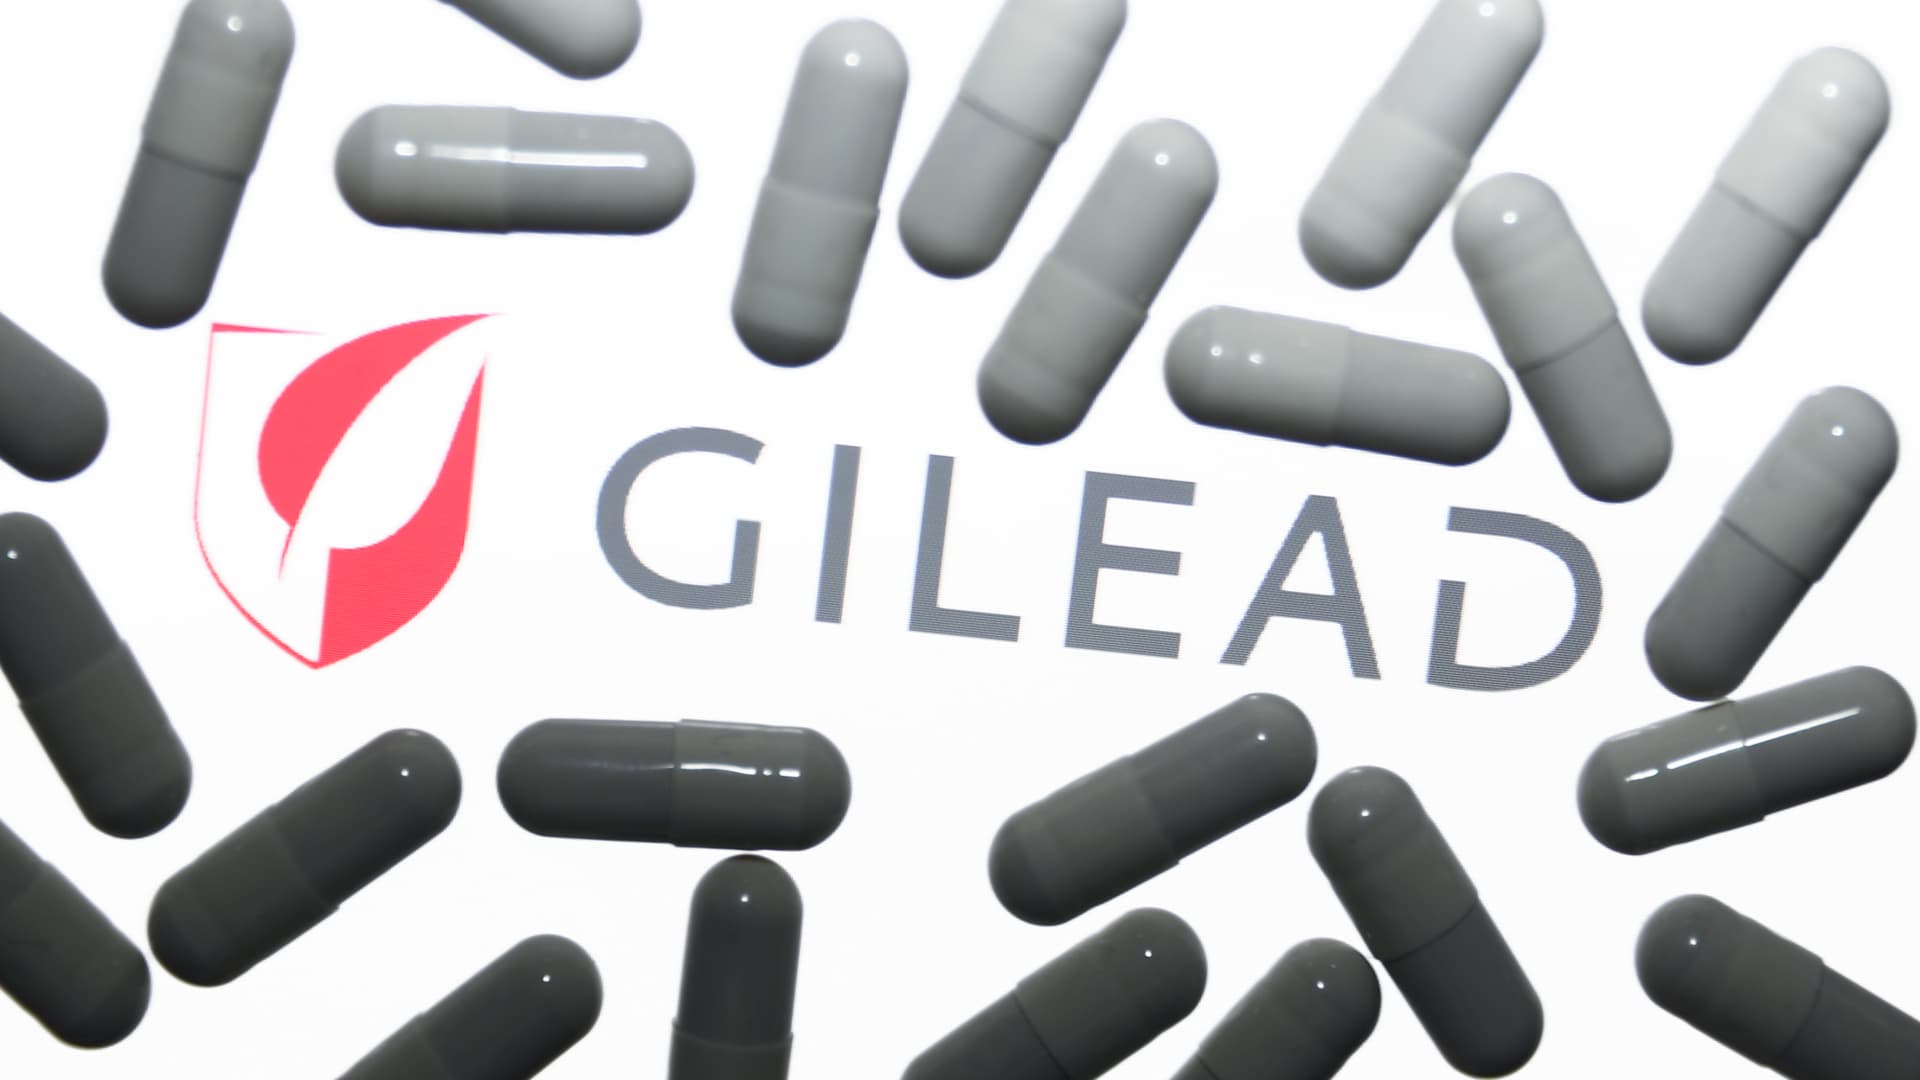 Gilead Sciences battles U.S. government in court over HIV prevention patent